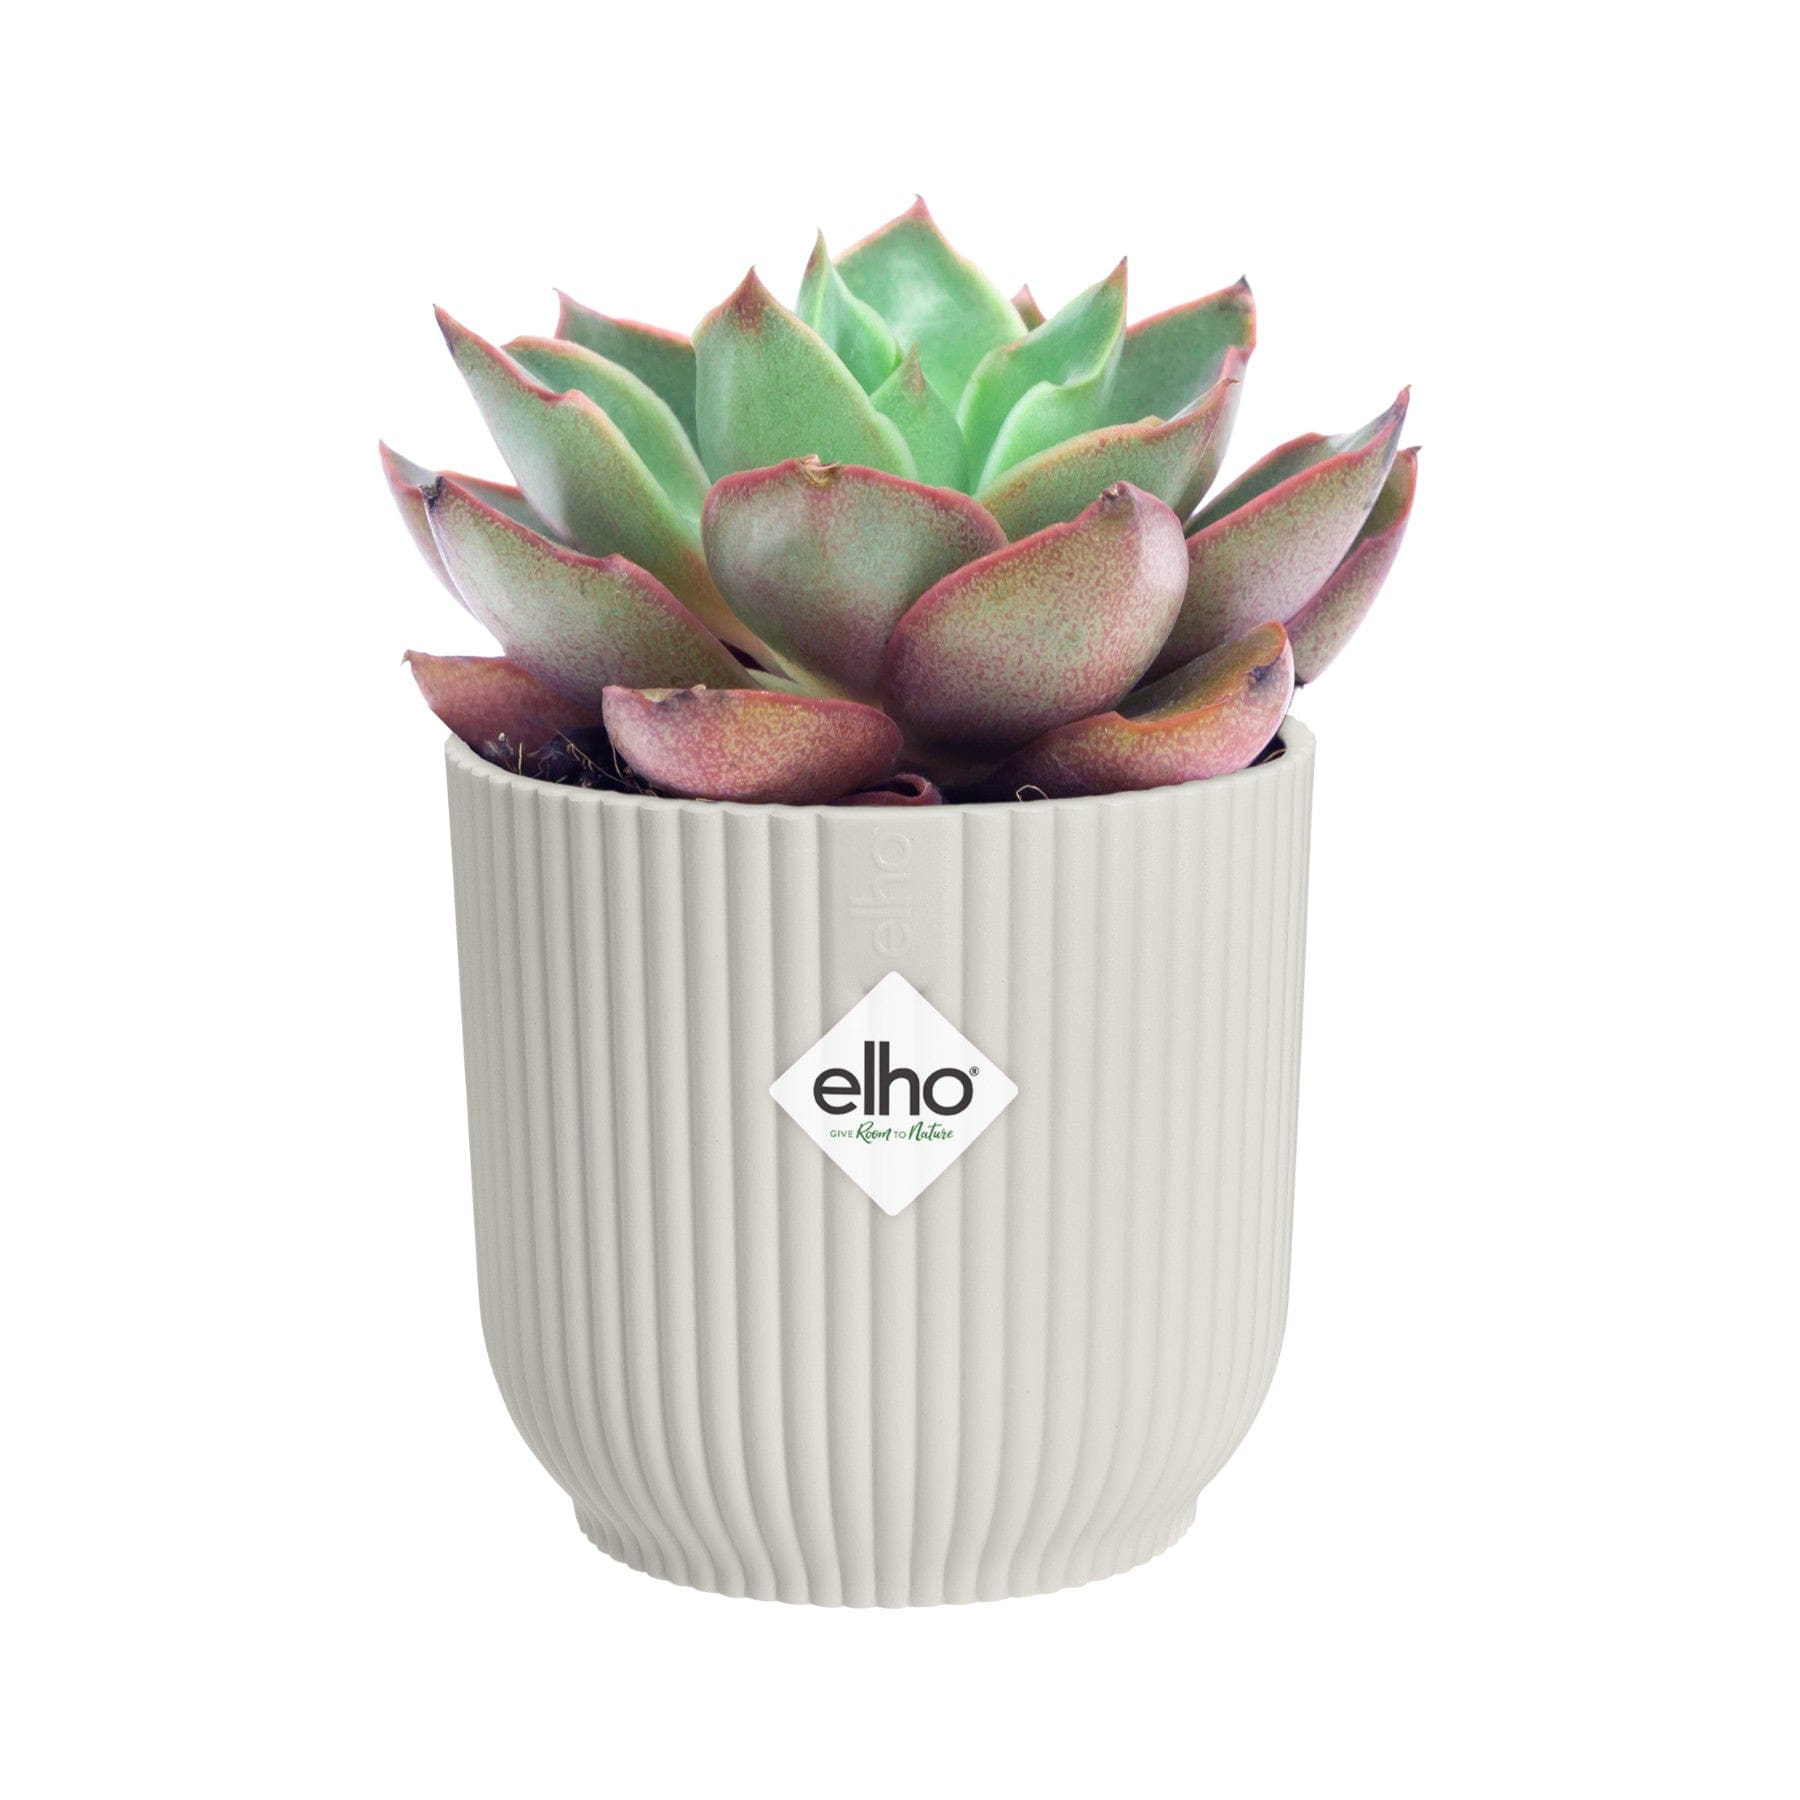 Green and purple succulent plant in white ribbed Elho brand pot on a white background.